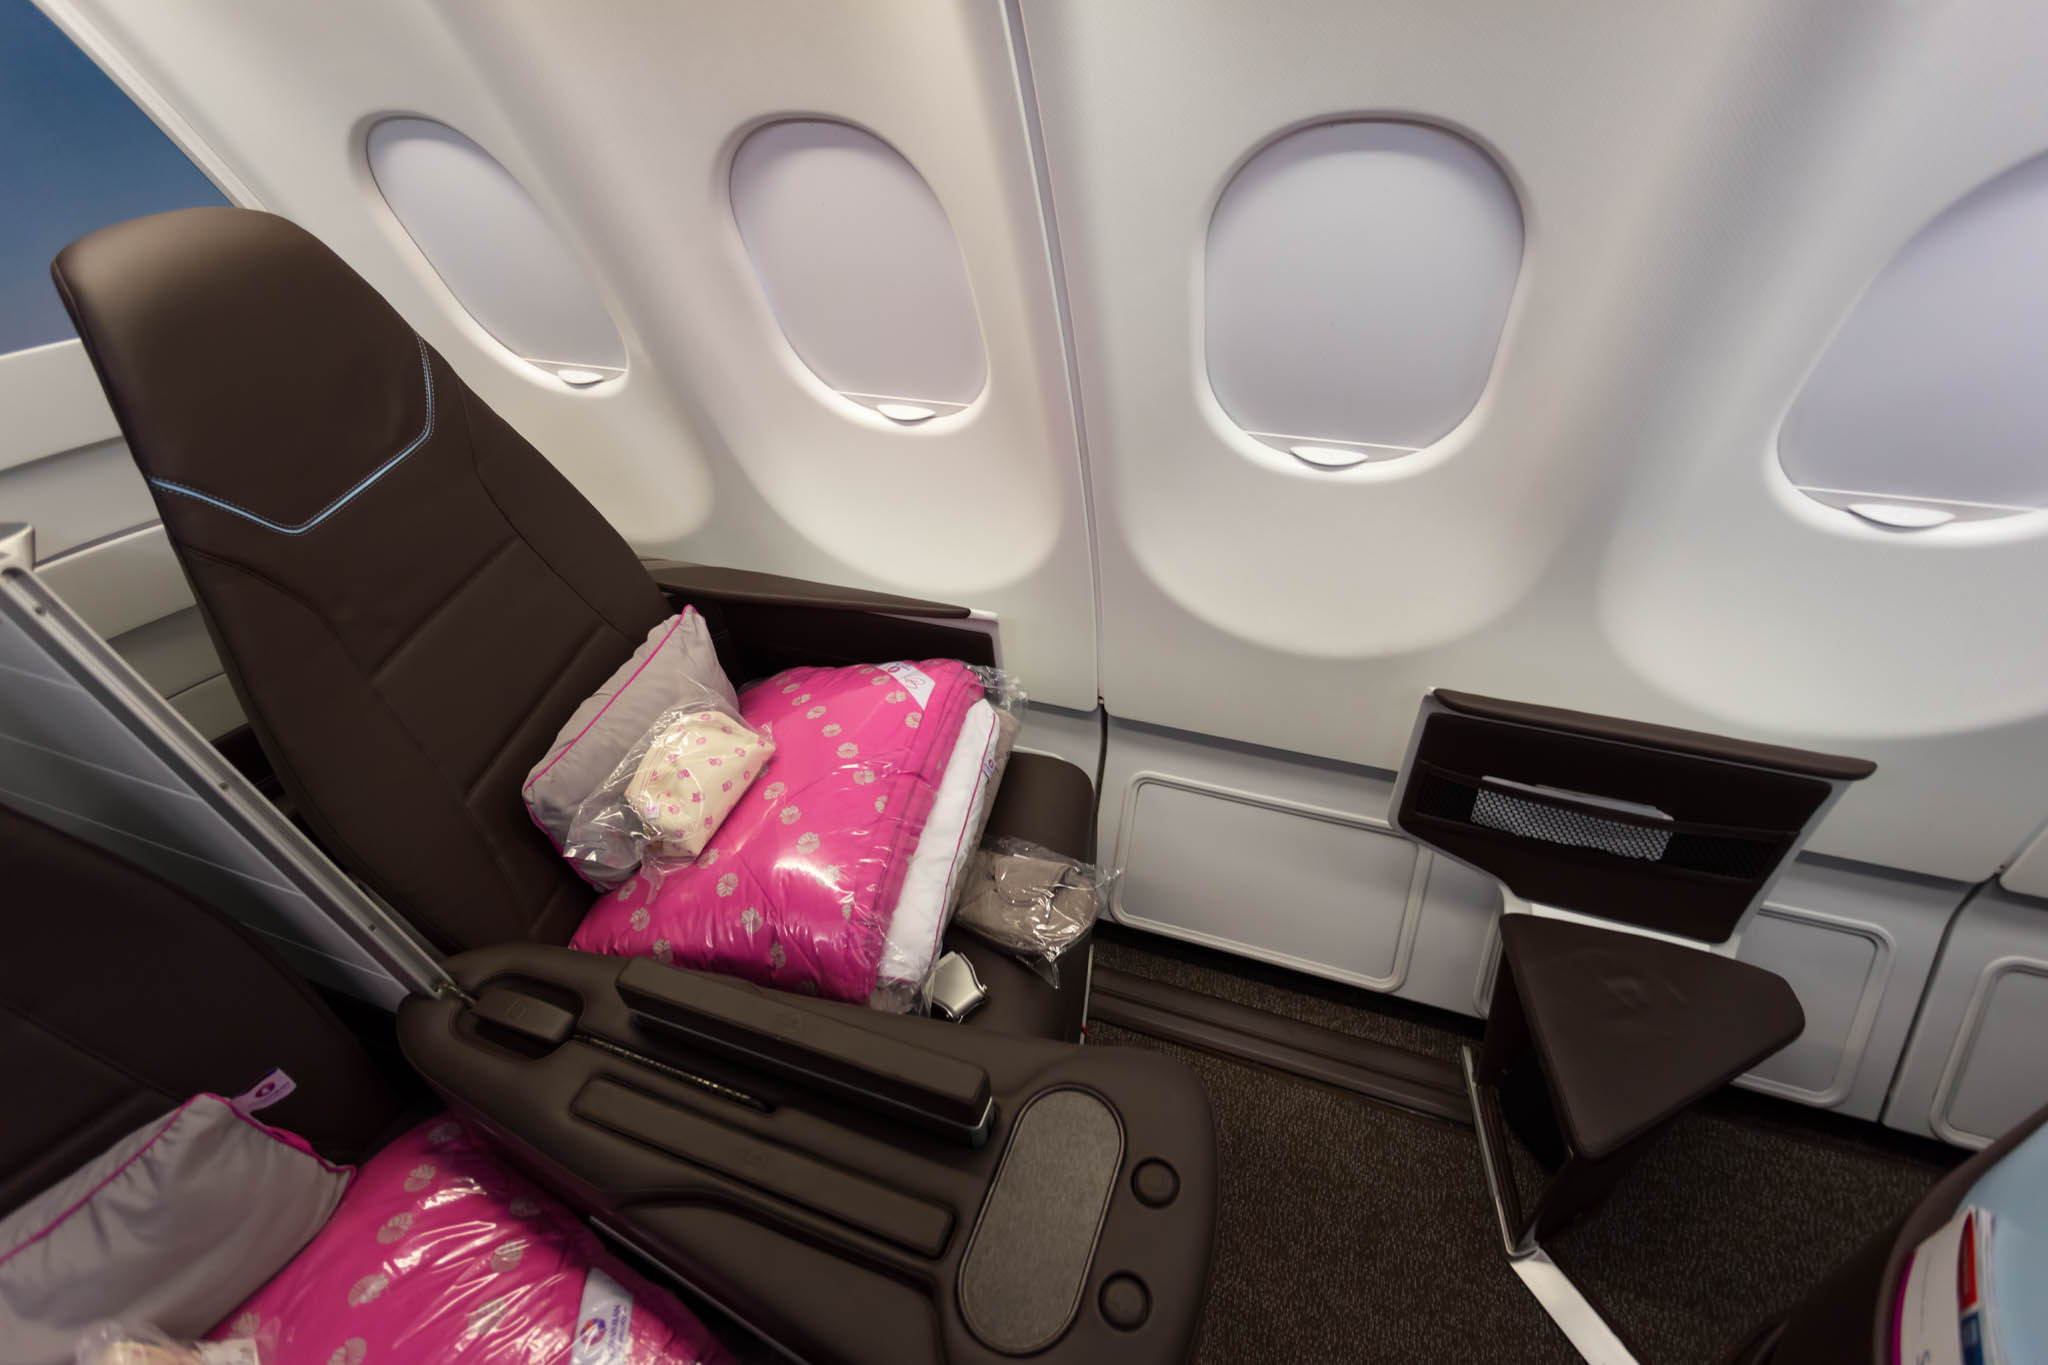 4. Review of Hawaiian Airlines Business Class on Airbus 330-300 from San Francisco to Maui